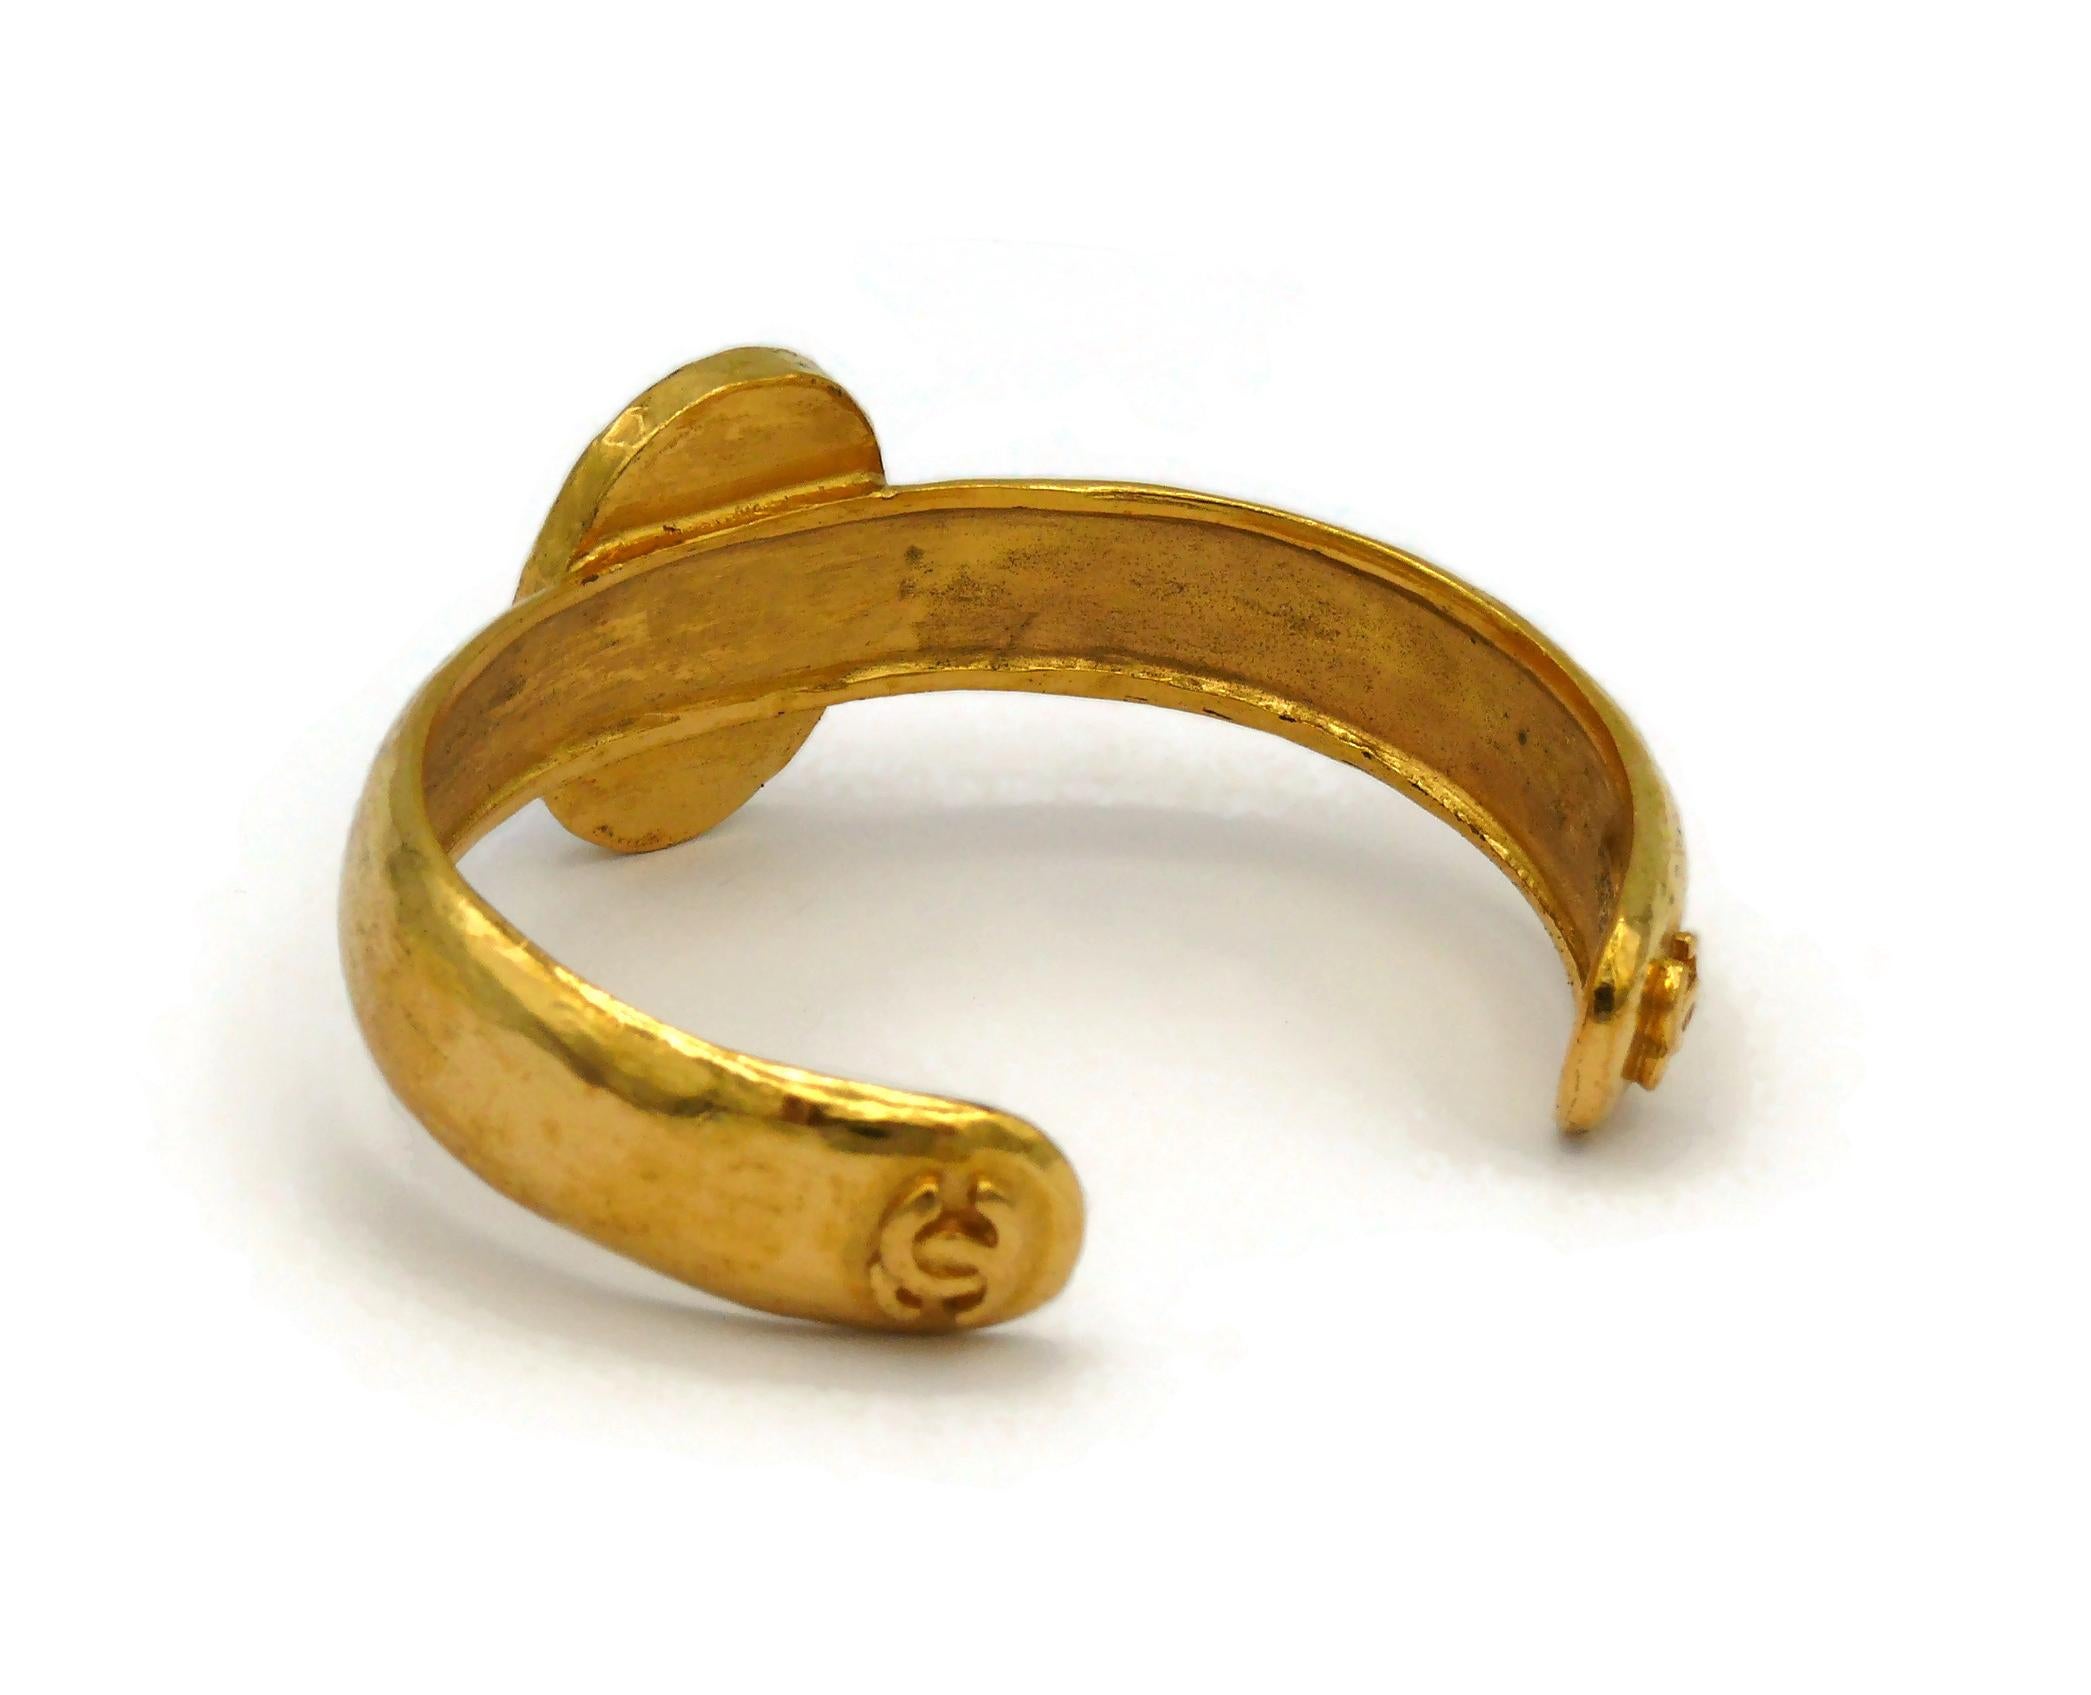 CHANEL by KARL LAGERFELD Vintage Gold Tone Blue Stone Bangle Bracelet, Fall 1996 For Sale 3